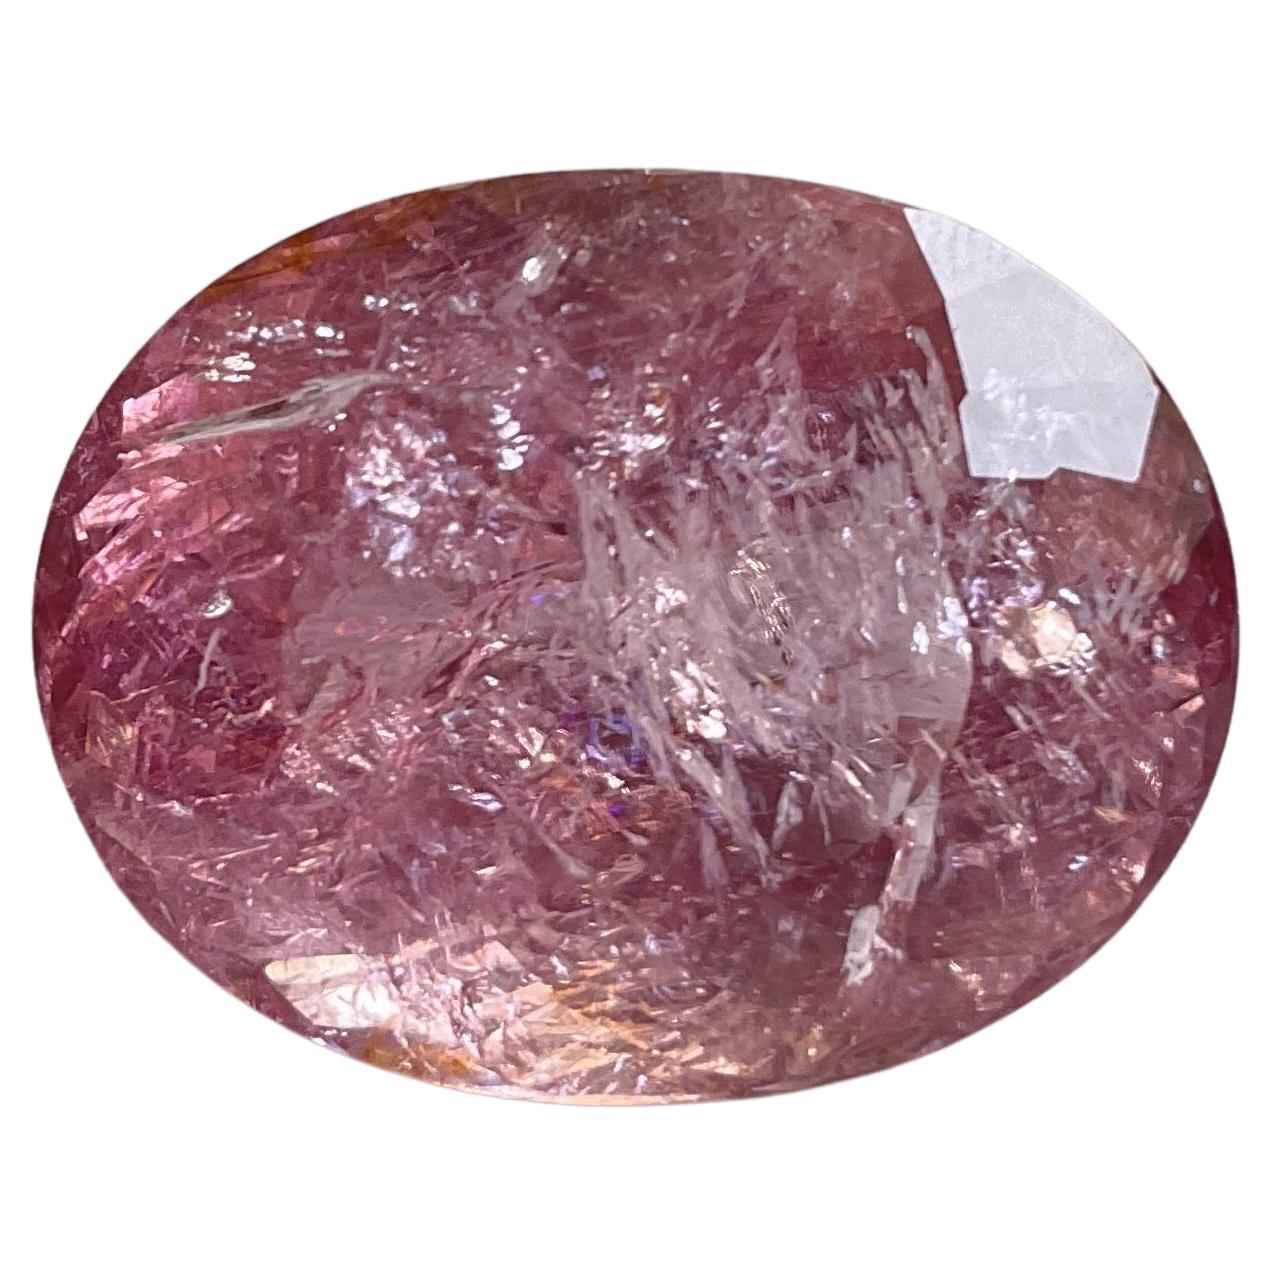 69.74 Carats Burmese Tourmaline Oval Cut Stone for Fine Jewelry Natural Gemstone For Sale